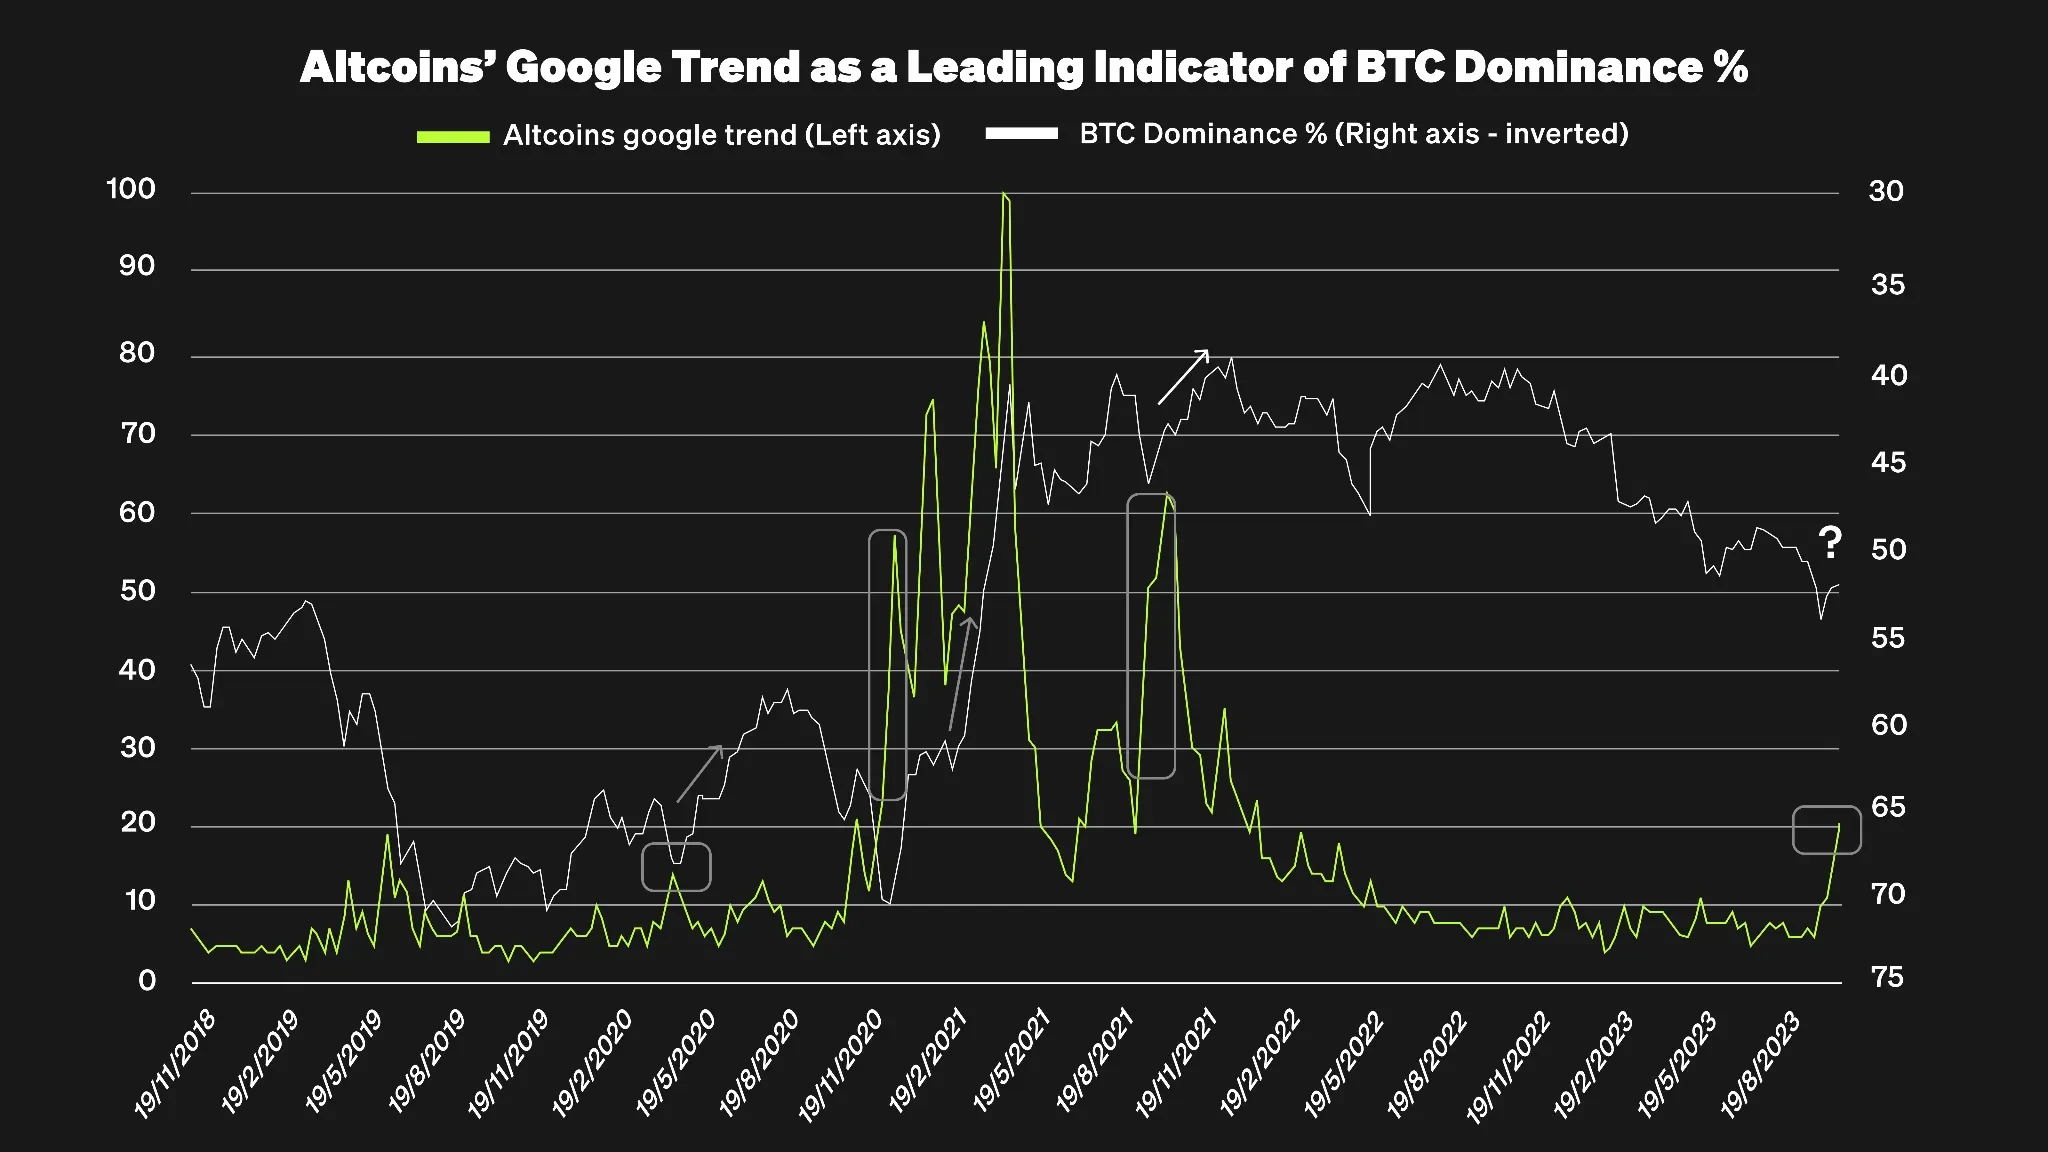 Altcoins' Google Trend as a Leading Indicator of BTC Dominance %